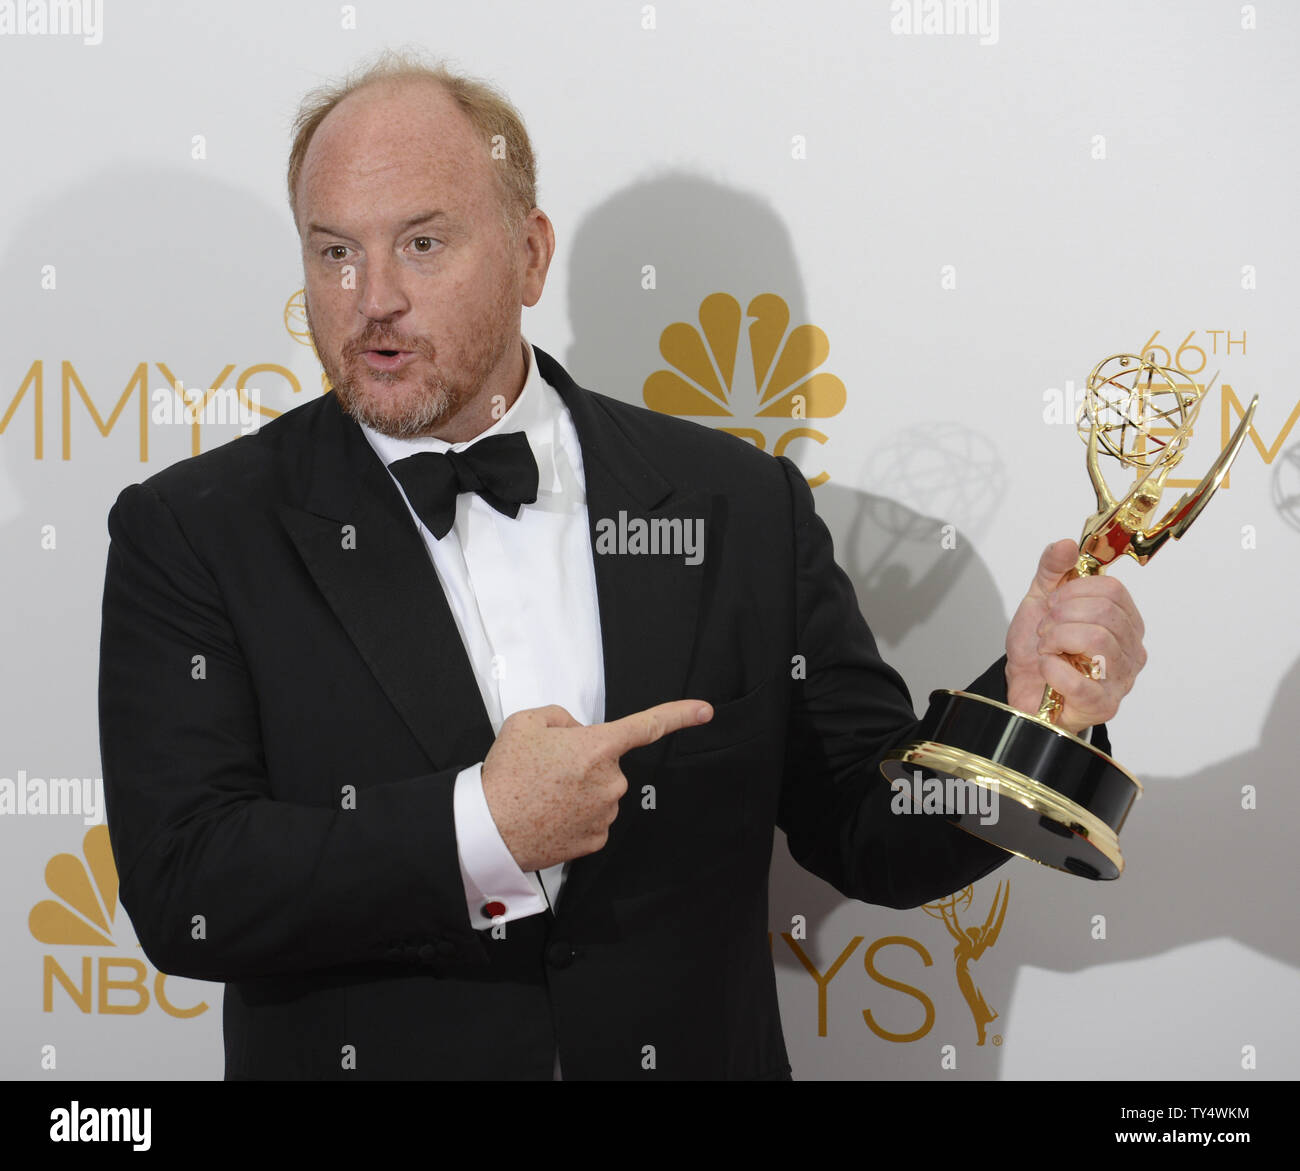 Louis ck hi-res stock photography and images - Alamy